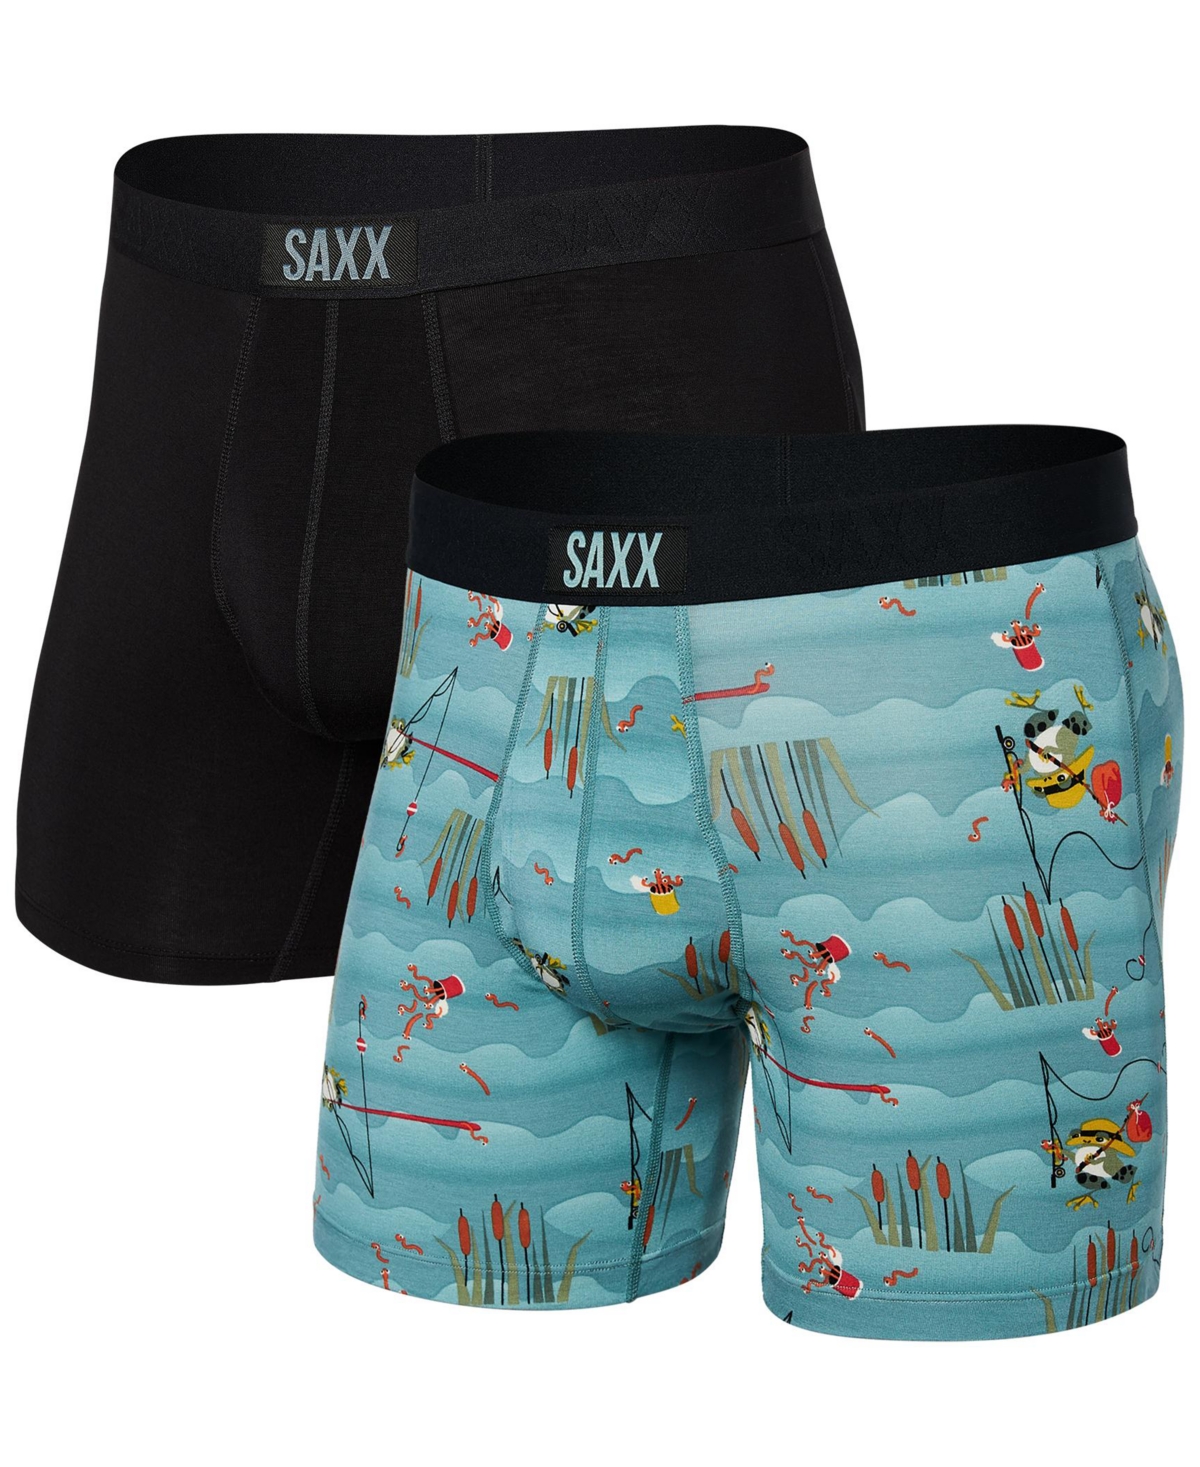 Saxx Men's Ultra Super Soft Relaxed Fit Boxer Briefs – 2pk In Gone Fishing,black